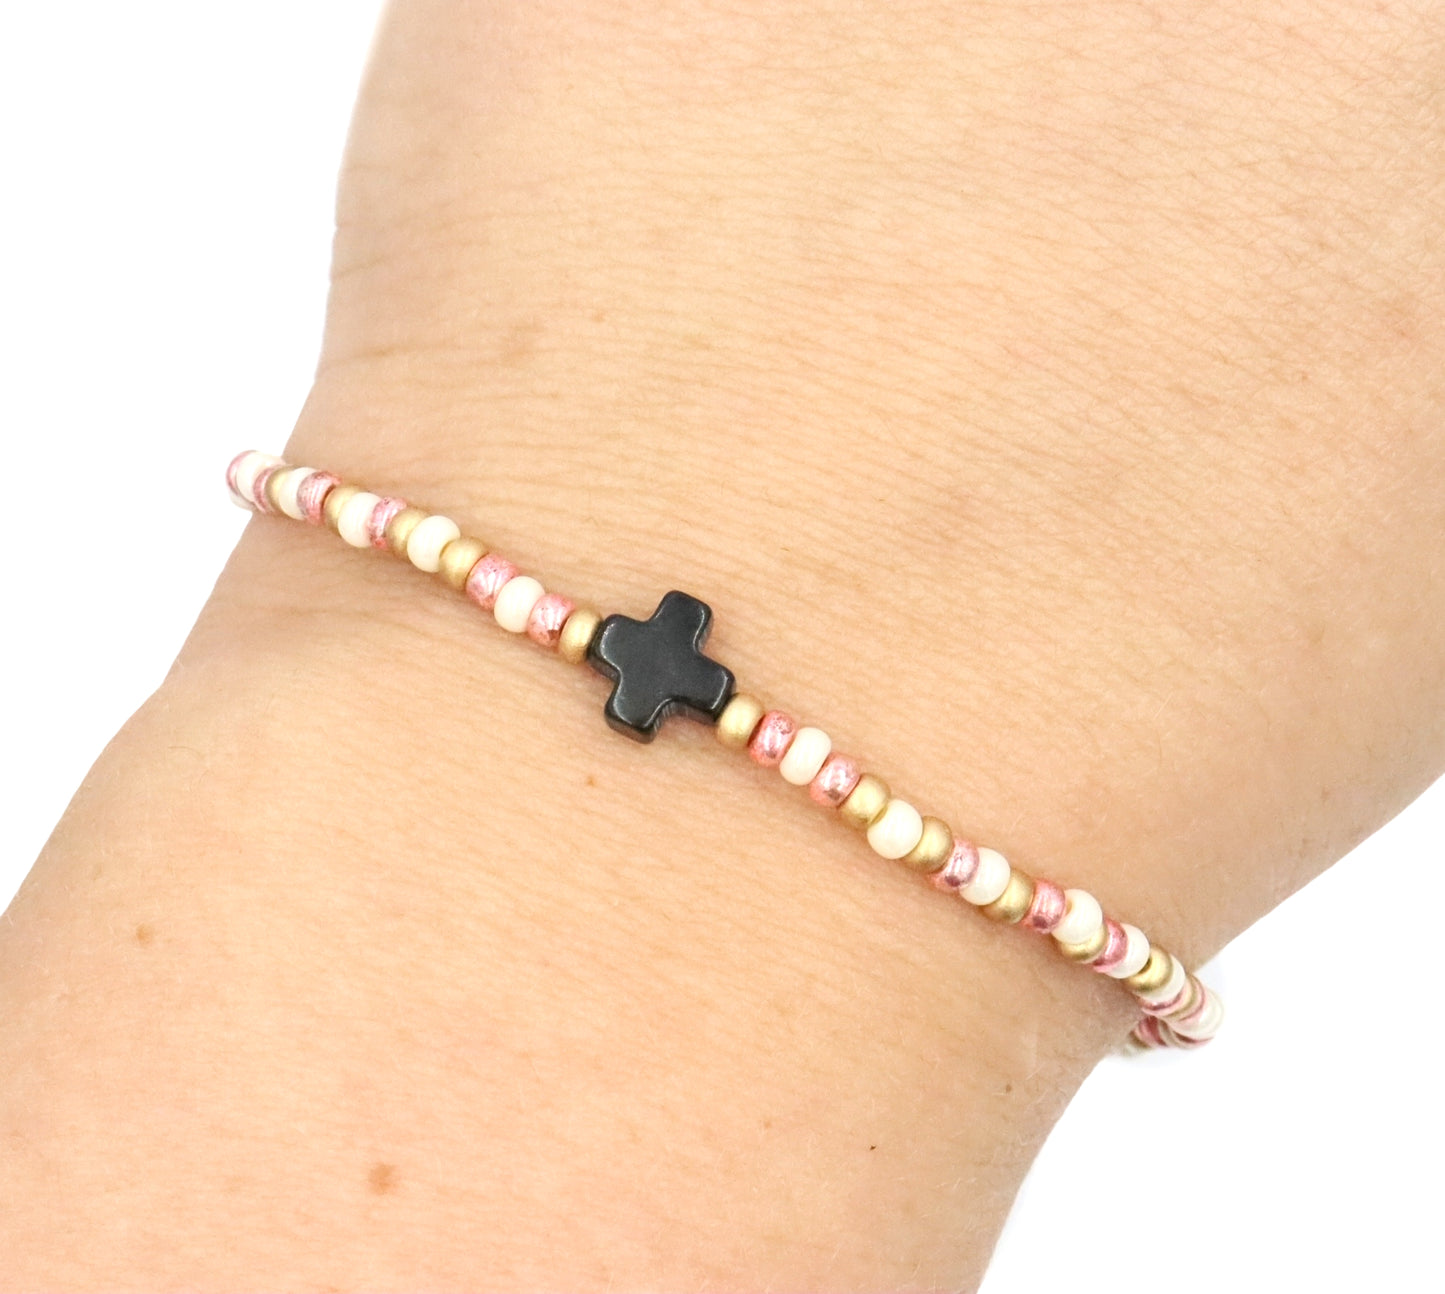 Neapolitan Cross Pearlescent White, Pink, and Matte Gold Glass Beads Bracelet by Monkey's Mojo